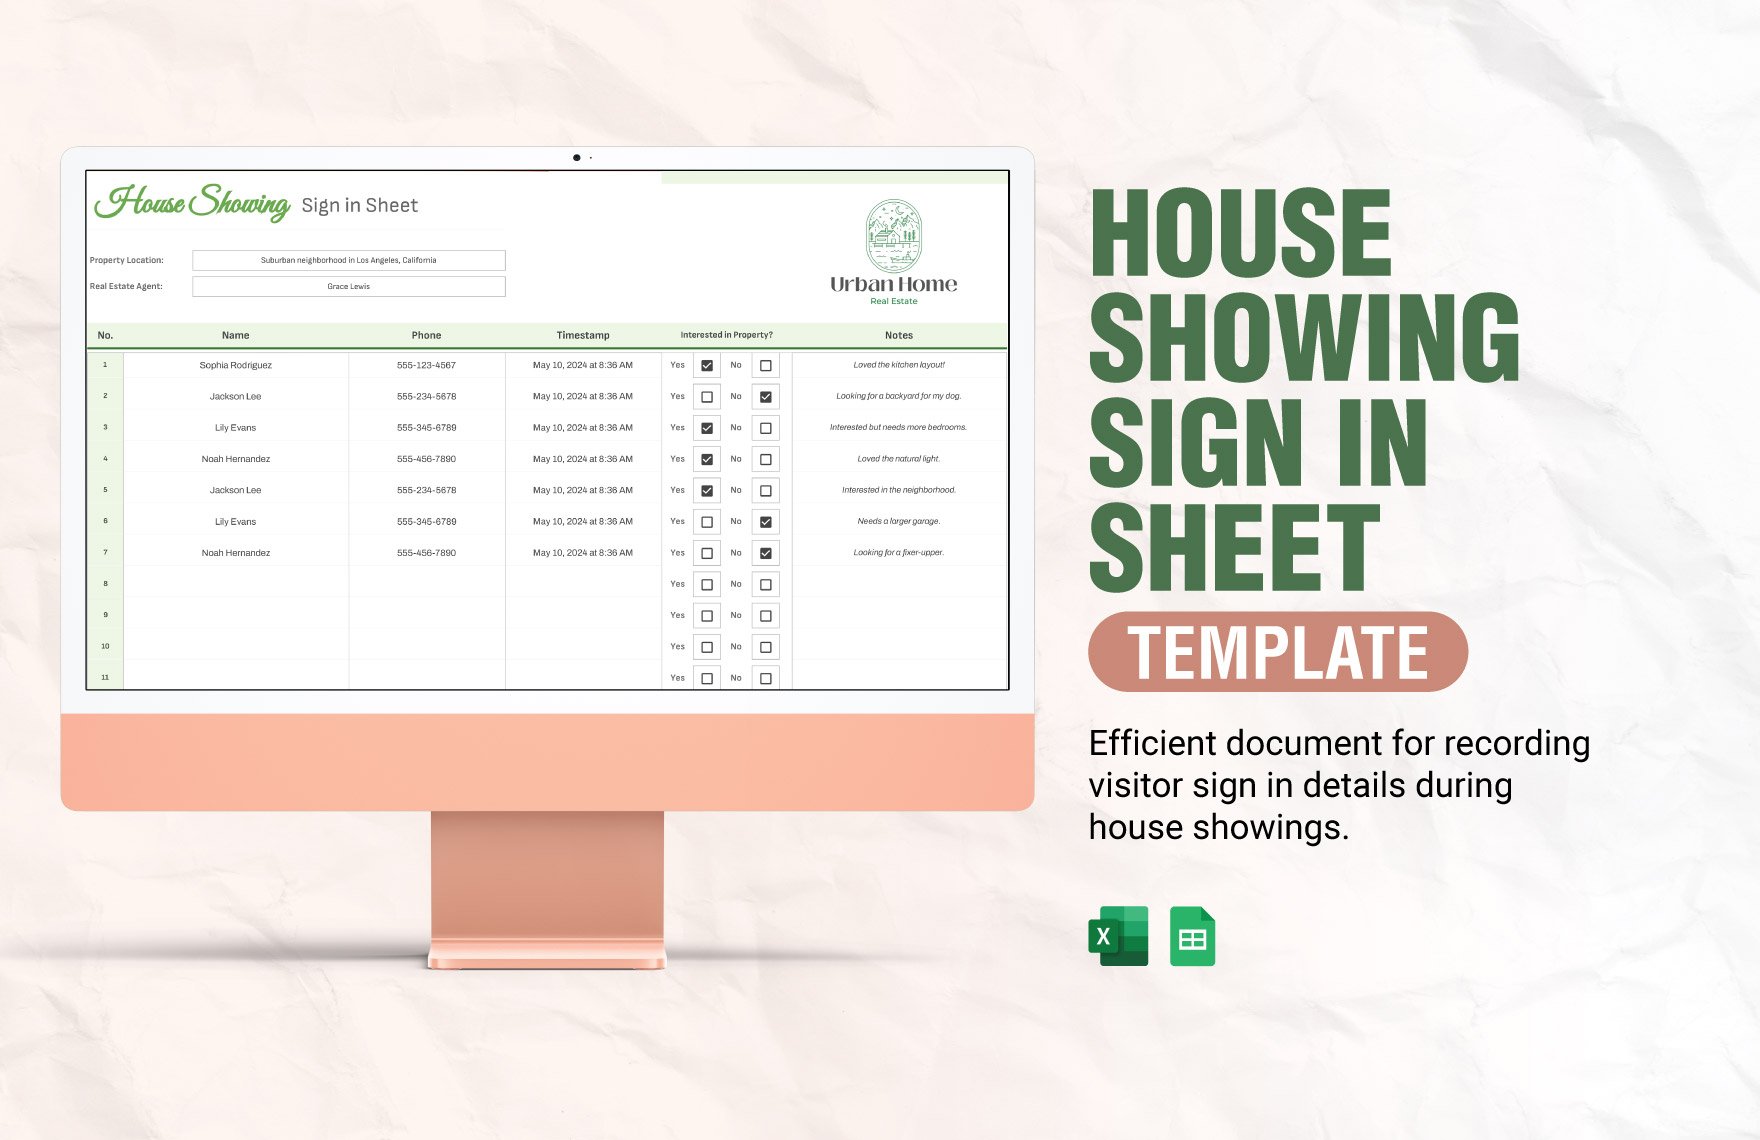 House Showing Sign in Sheet Template